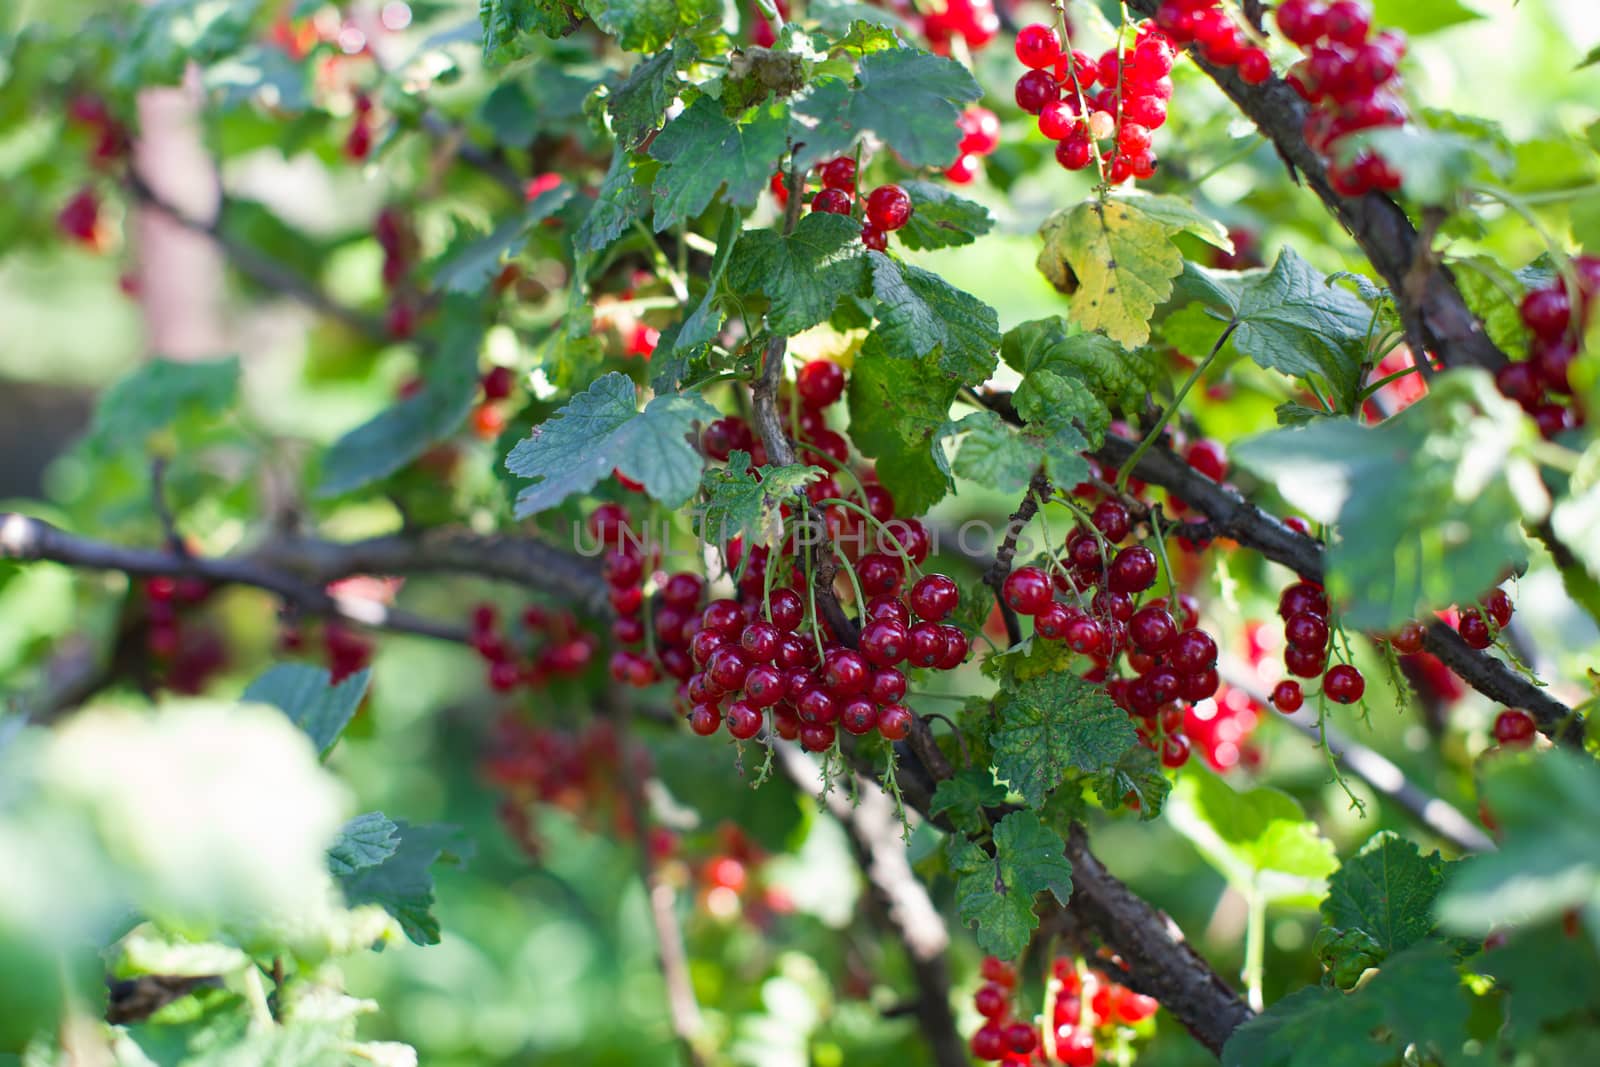 Ripe red berries on a branch in the country